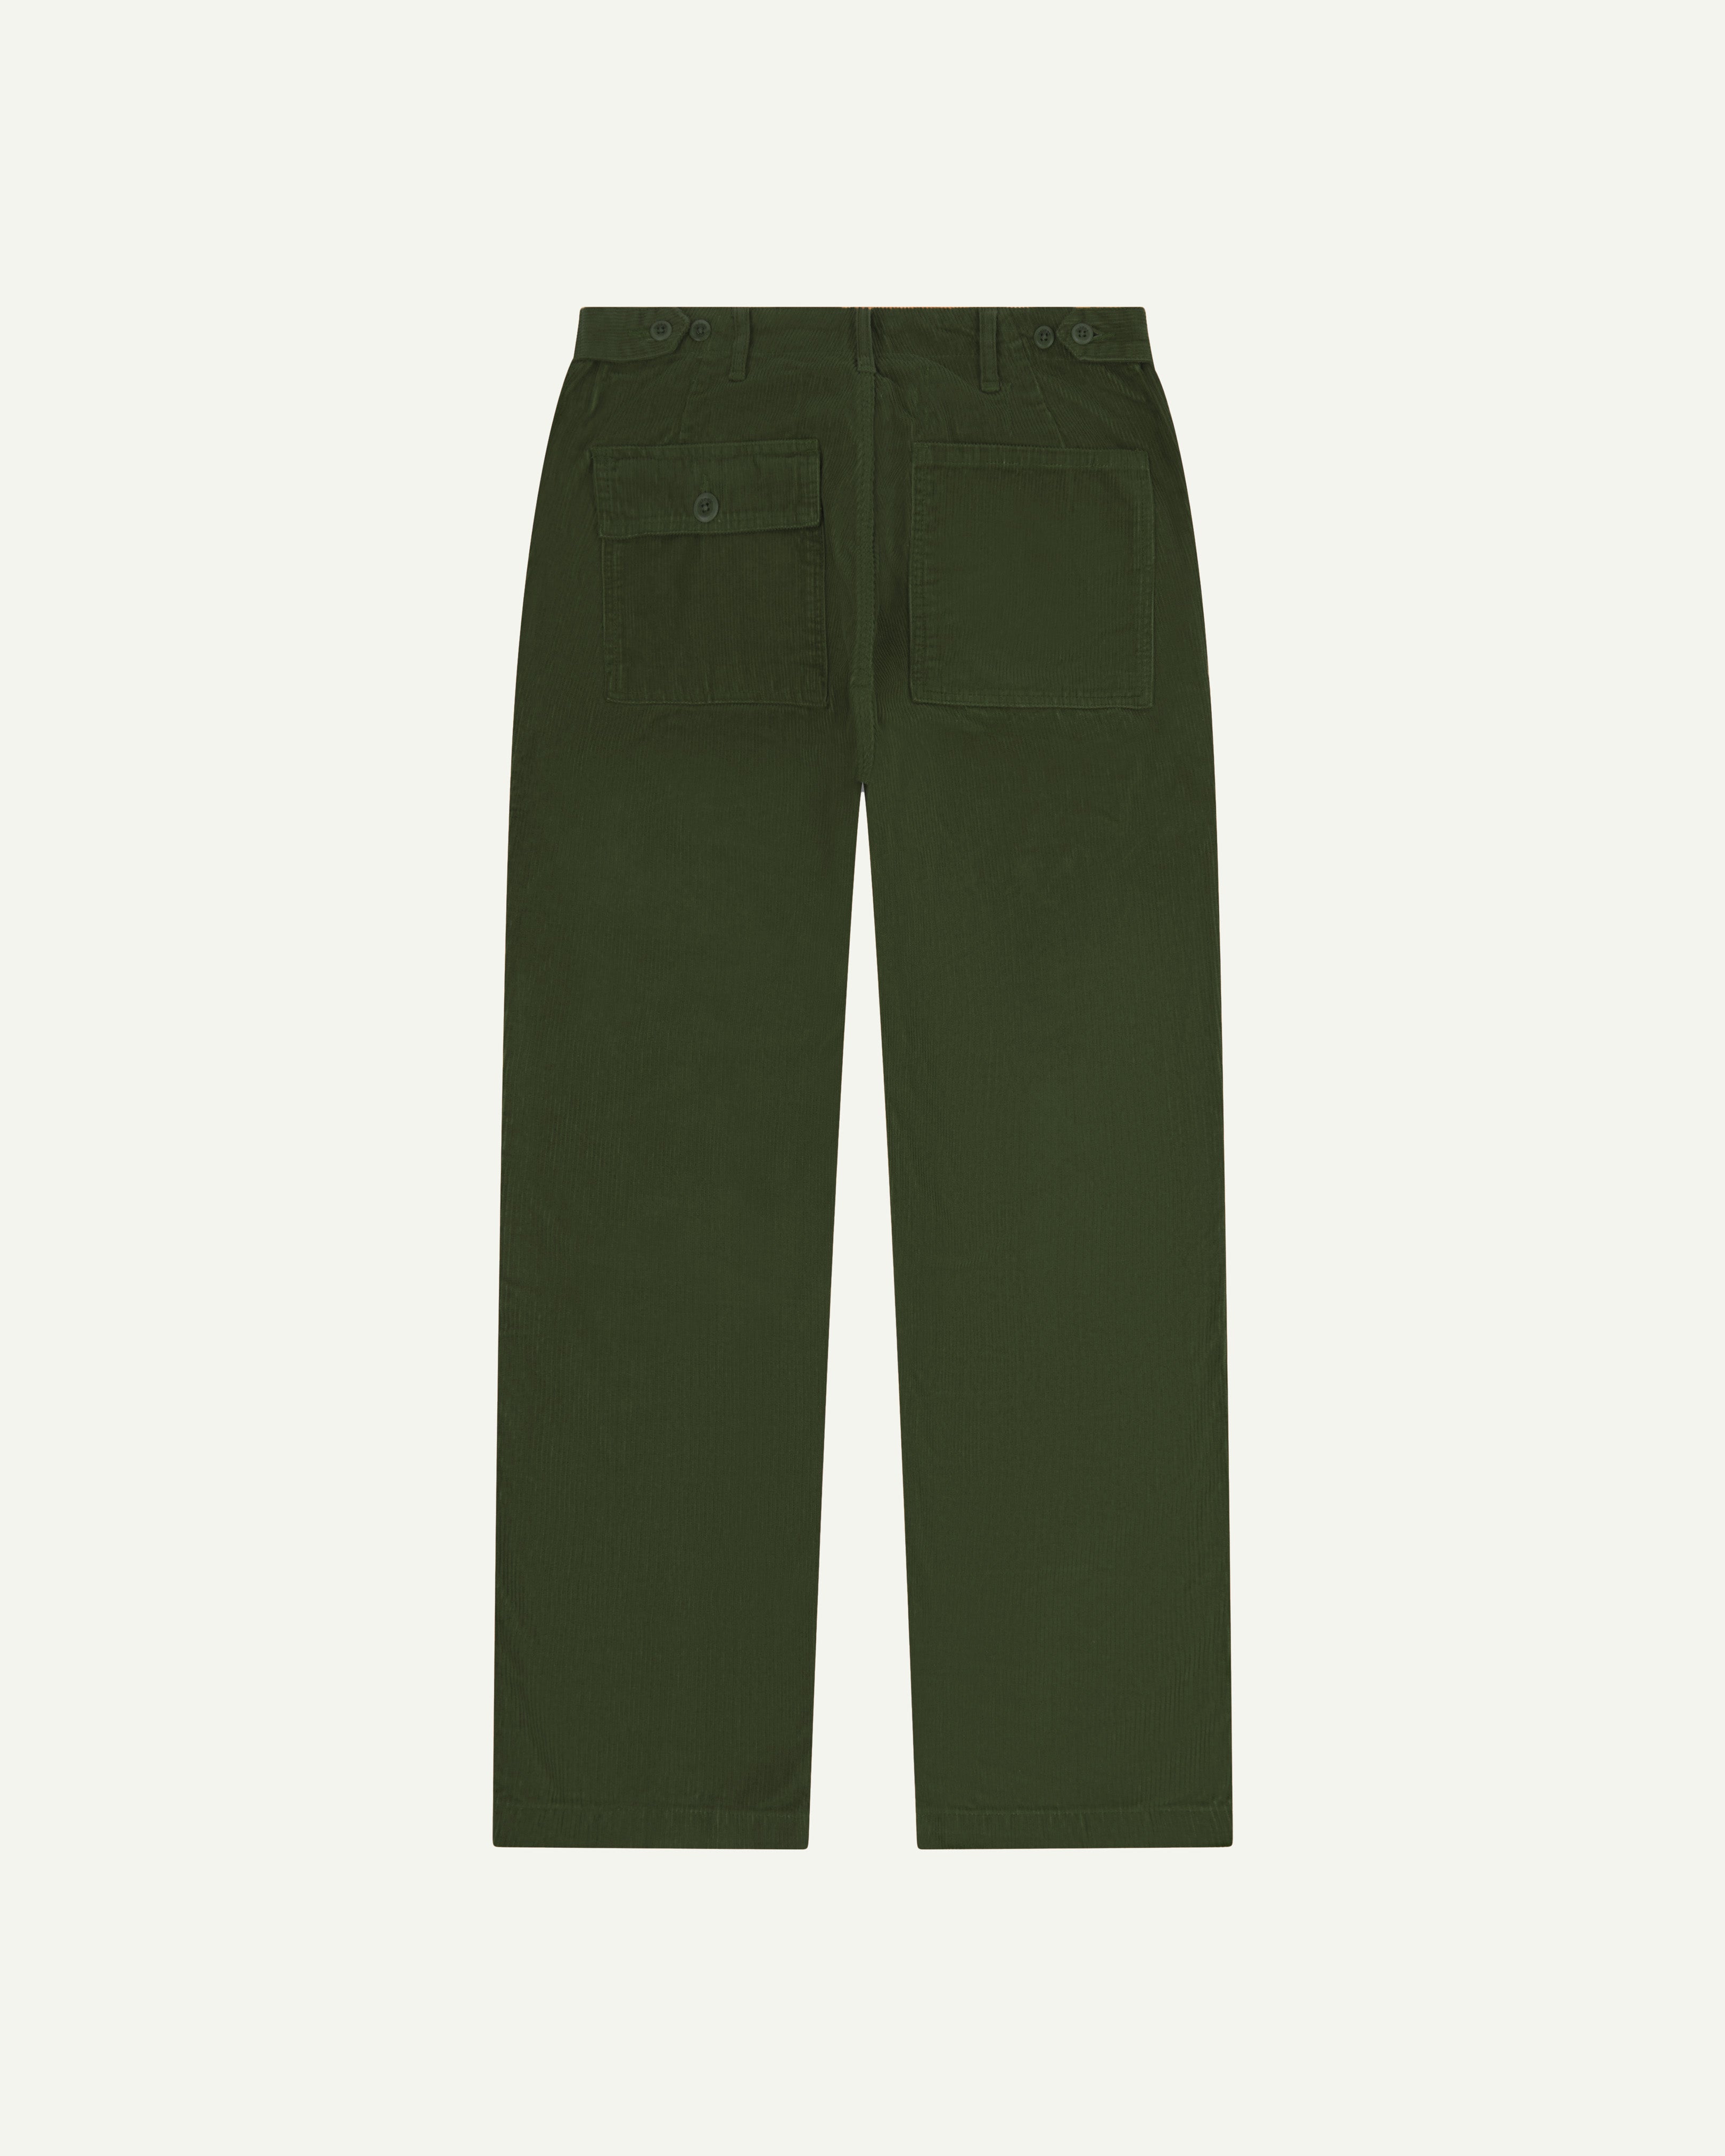 Flat back shot of Uskees #5005 cord workwear pants in coriander green showing back pockets, belt loops and adjutable waist.